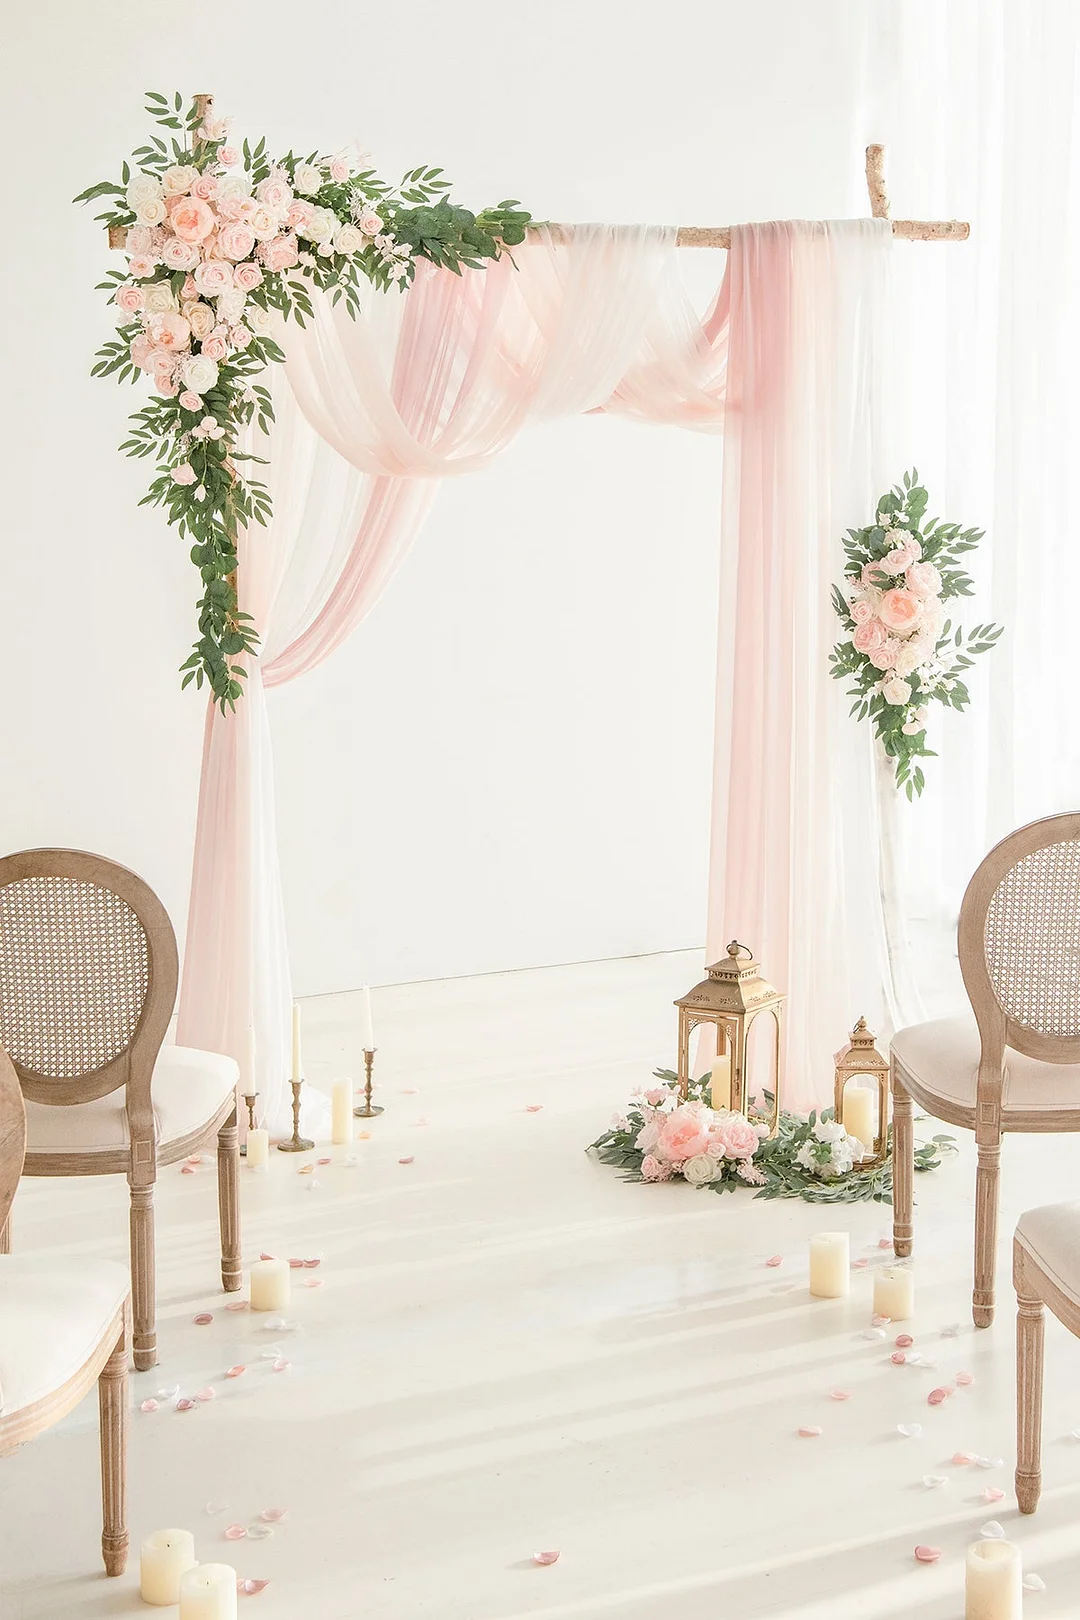 Flower Arch Decor with Drapes in Blush & Cream